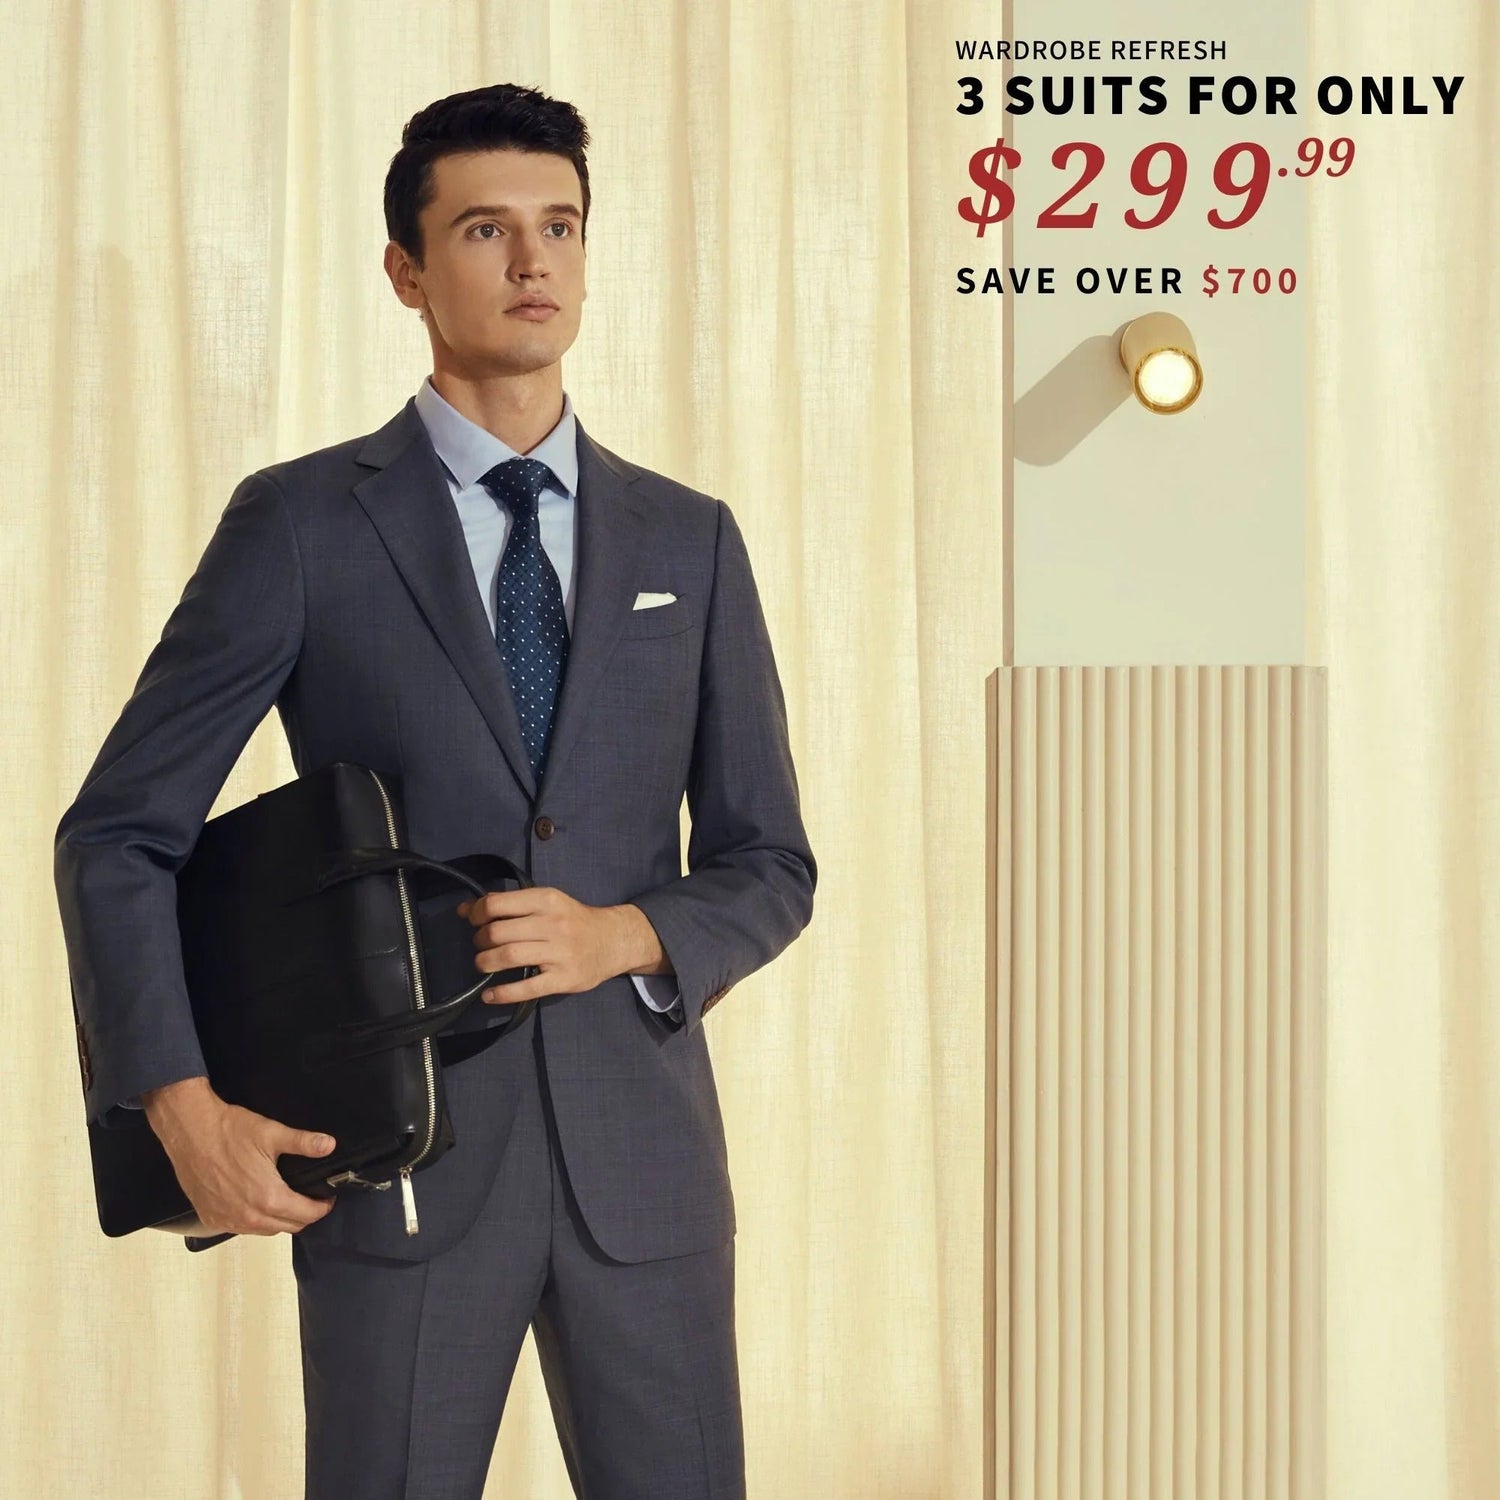 A man in a suit is holding a BYOB briefcase that matches his outfit.